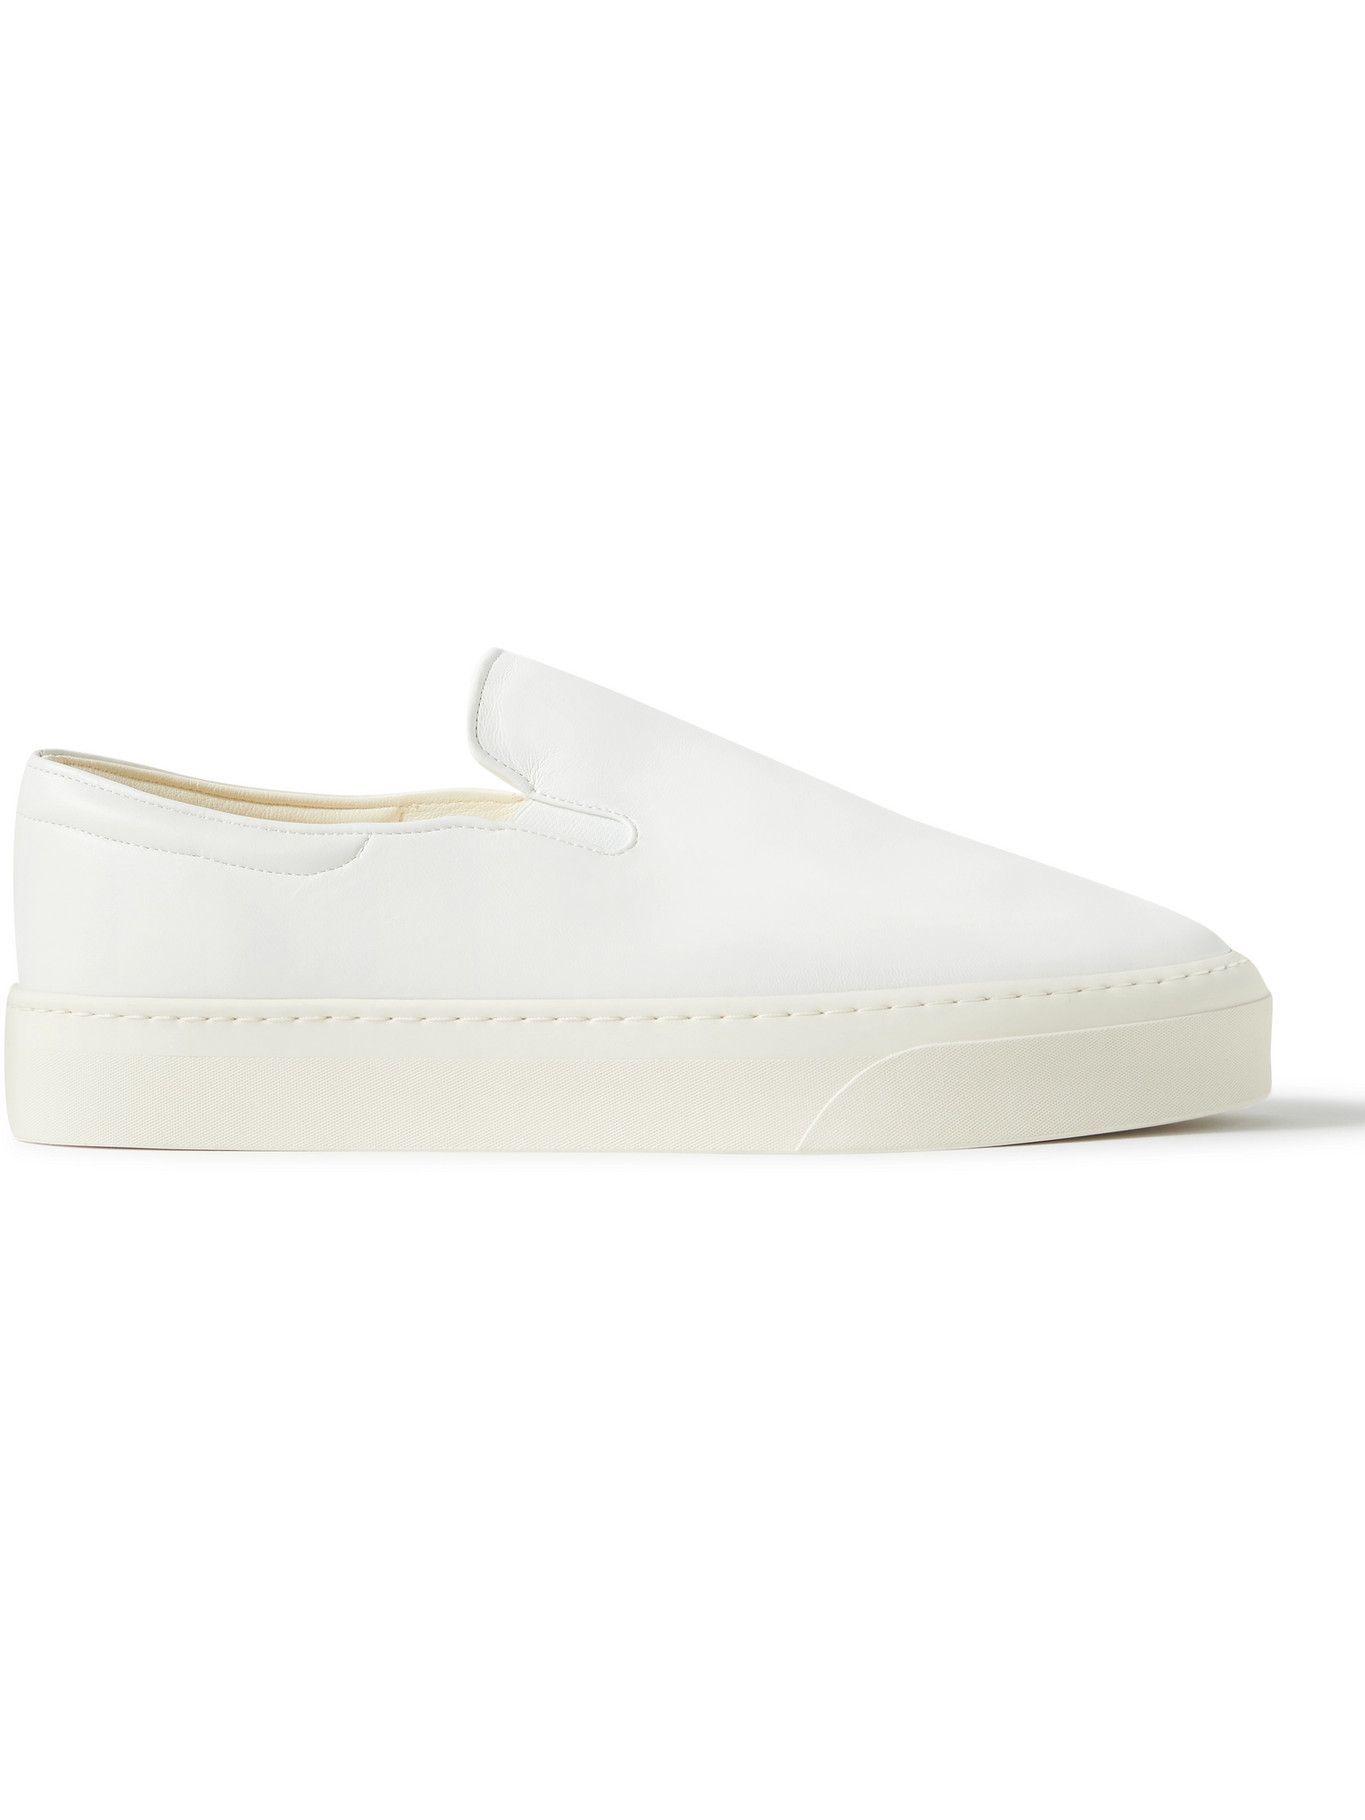 The Row - Dean Leather Slip-On Sneakers - White The Row